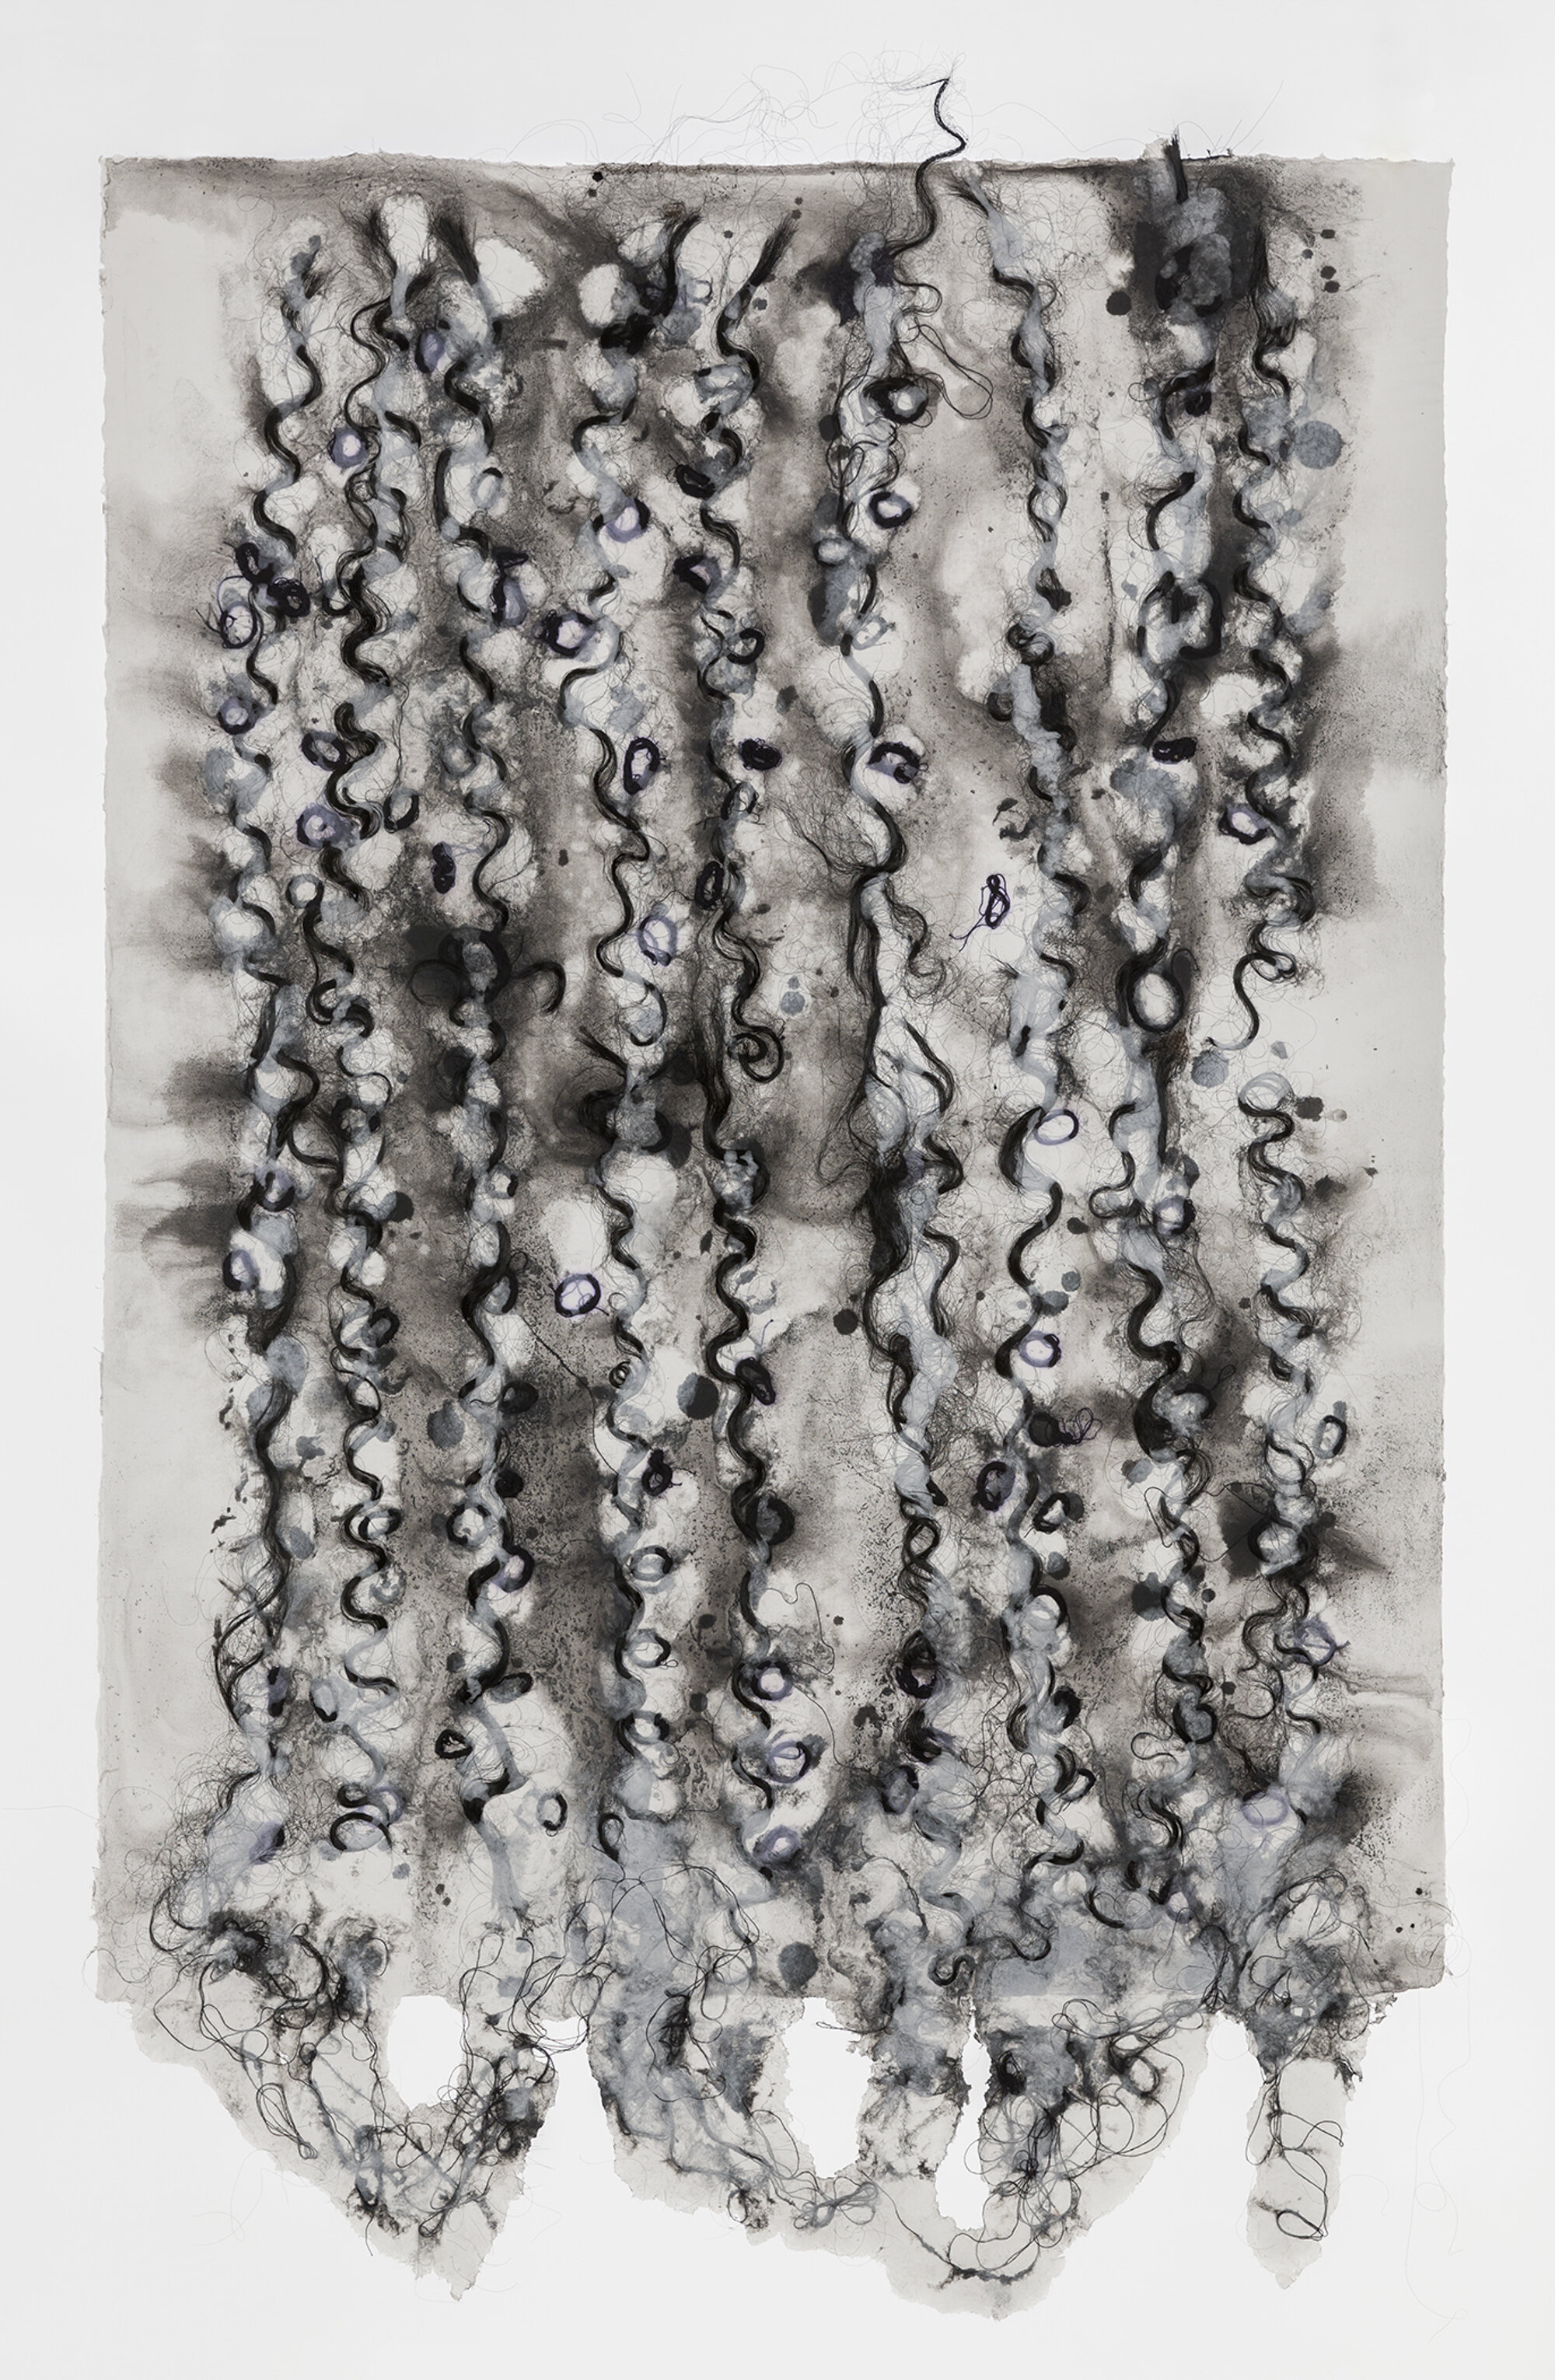   Untitled , 2017 Thread, black pigment, linen pulp, and linen handmade paper 38 x 22 in. 